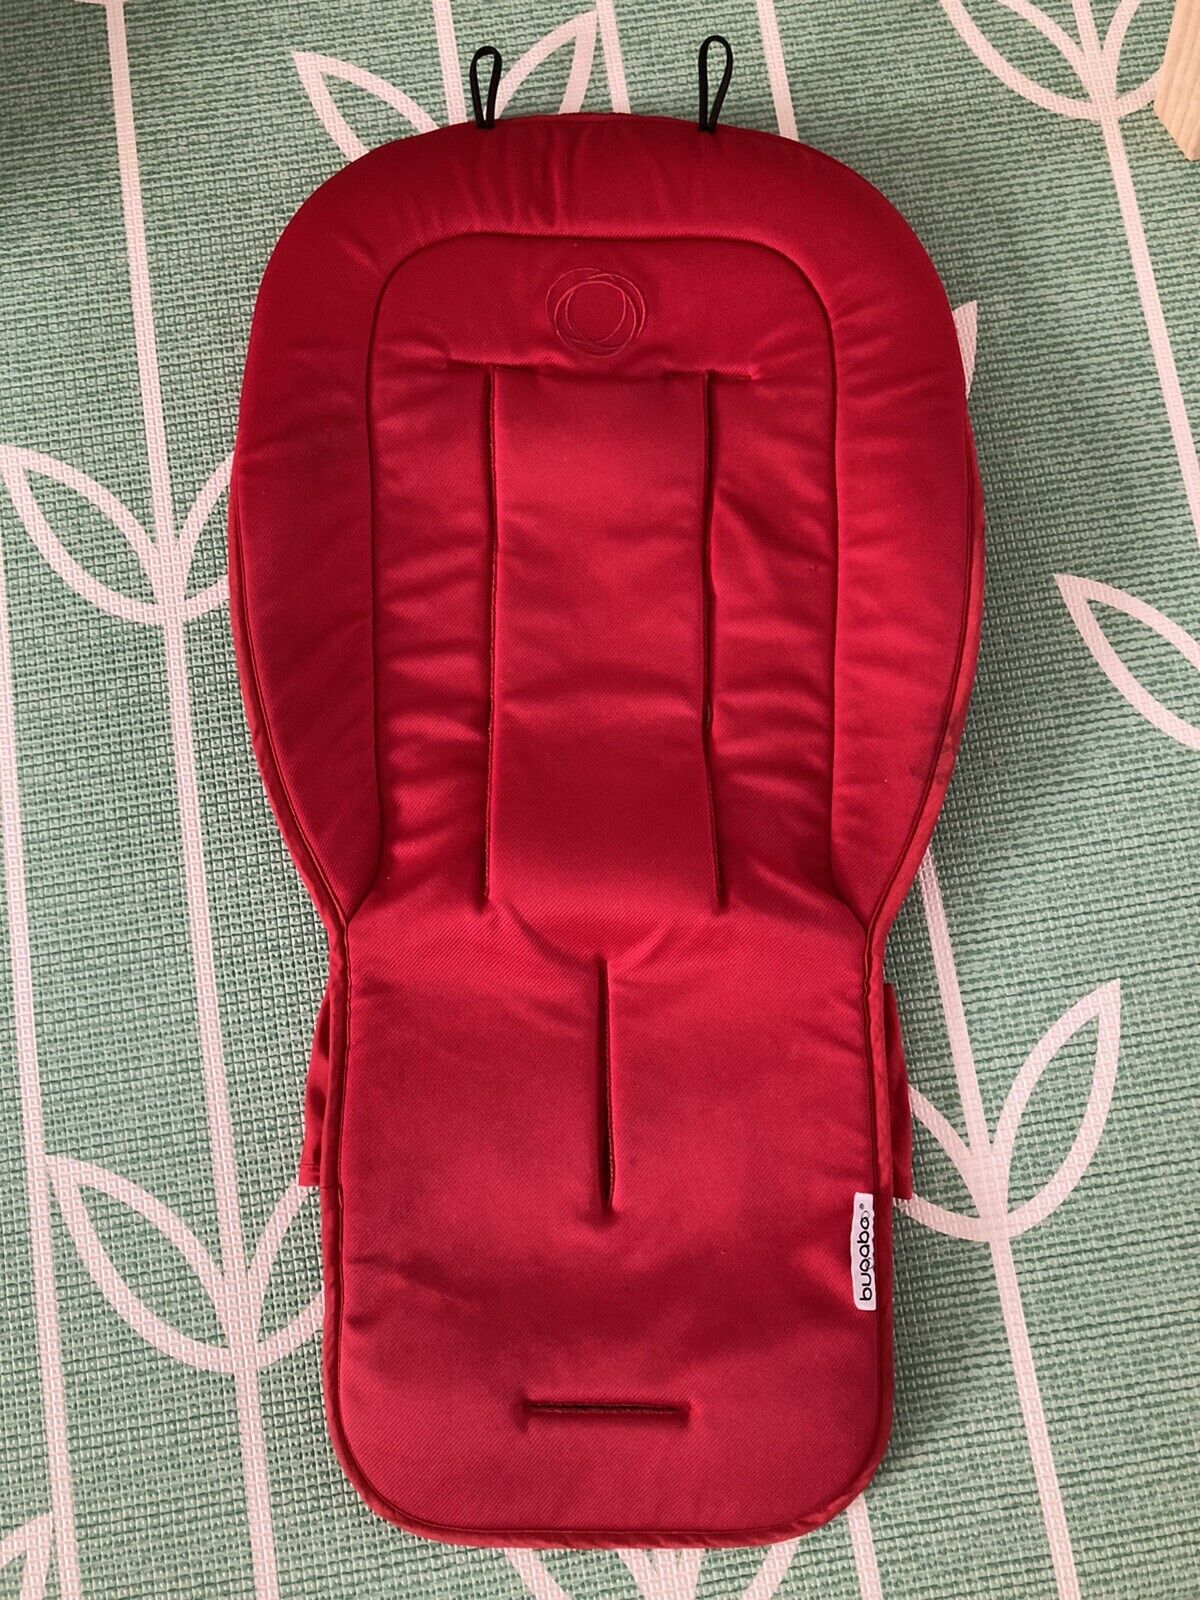 Bugaboo Universal Seat Liner, Camelion, Buffalo, Red